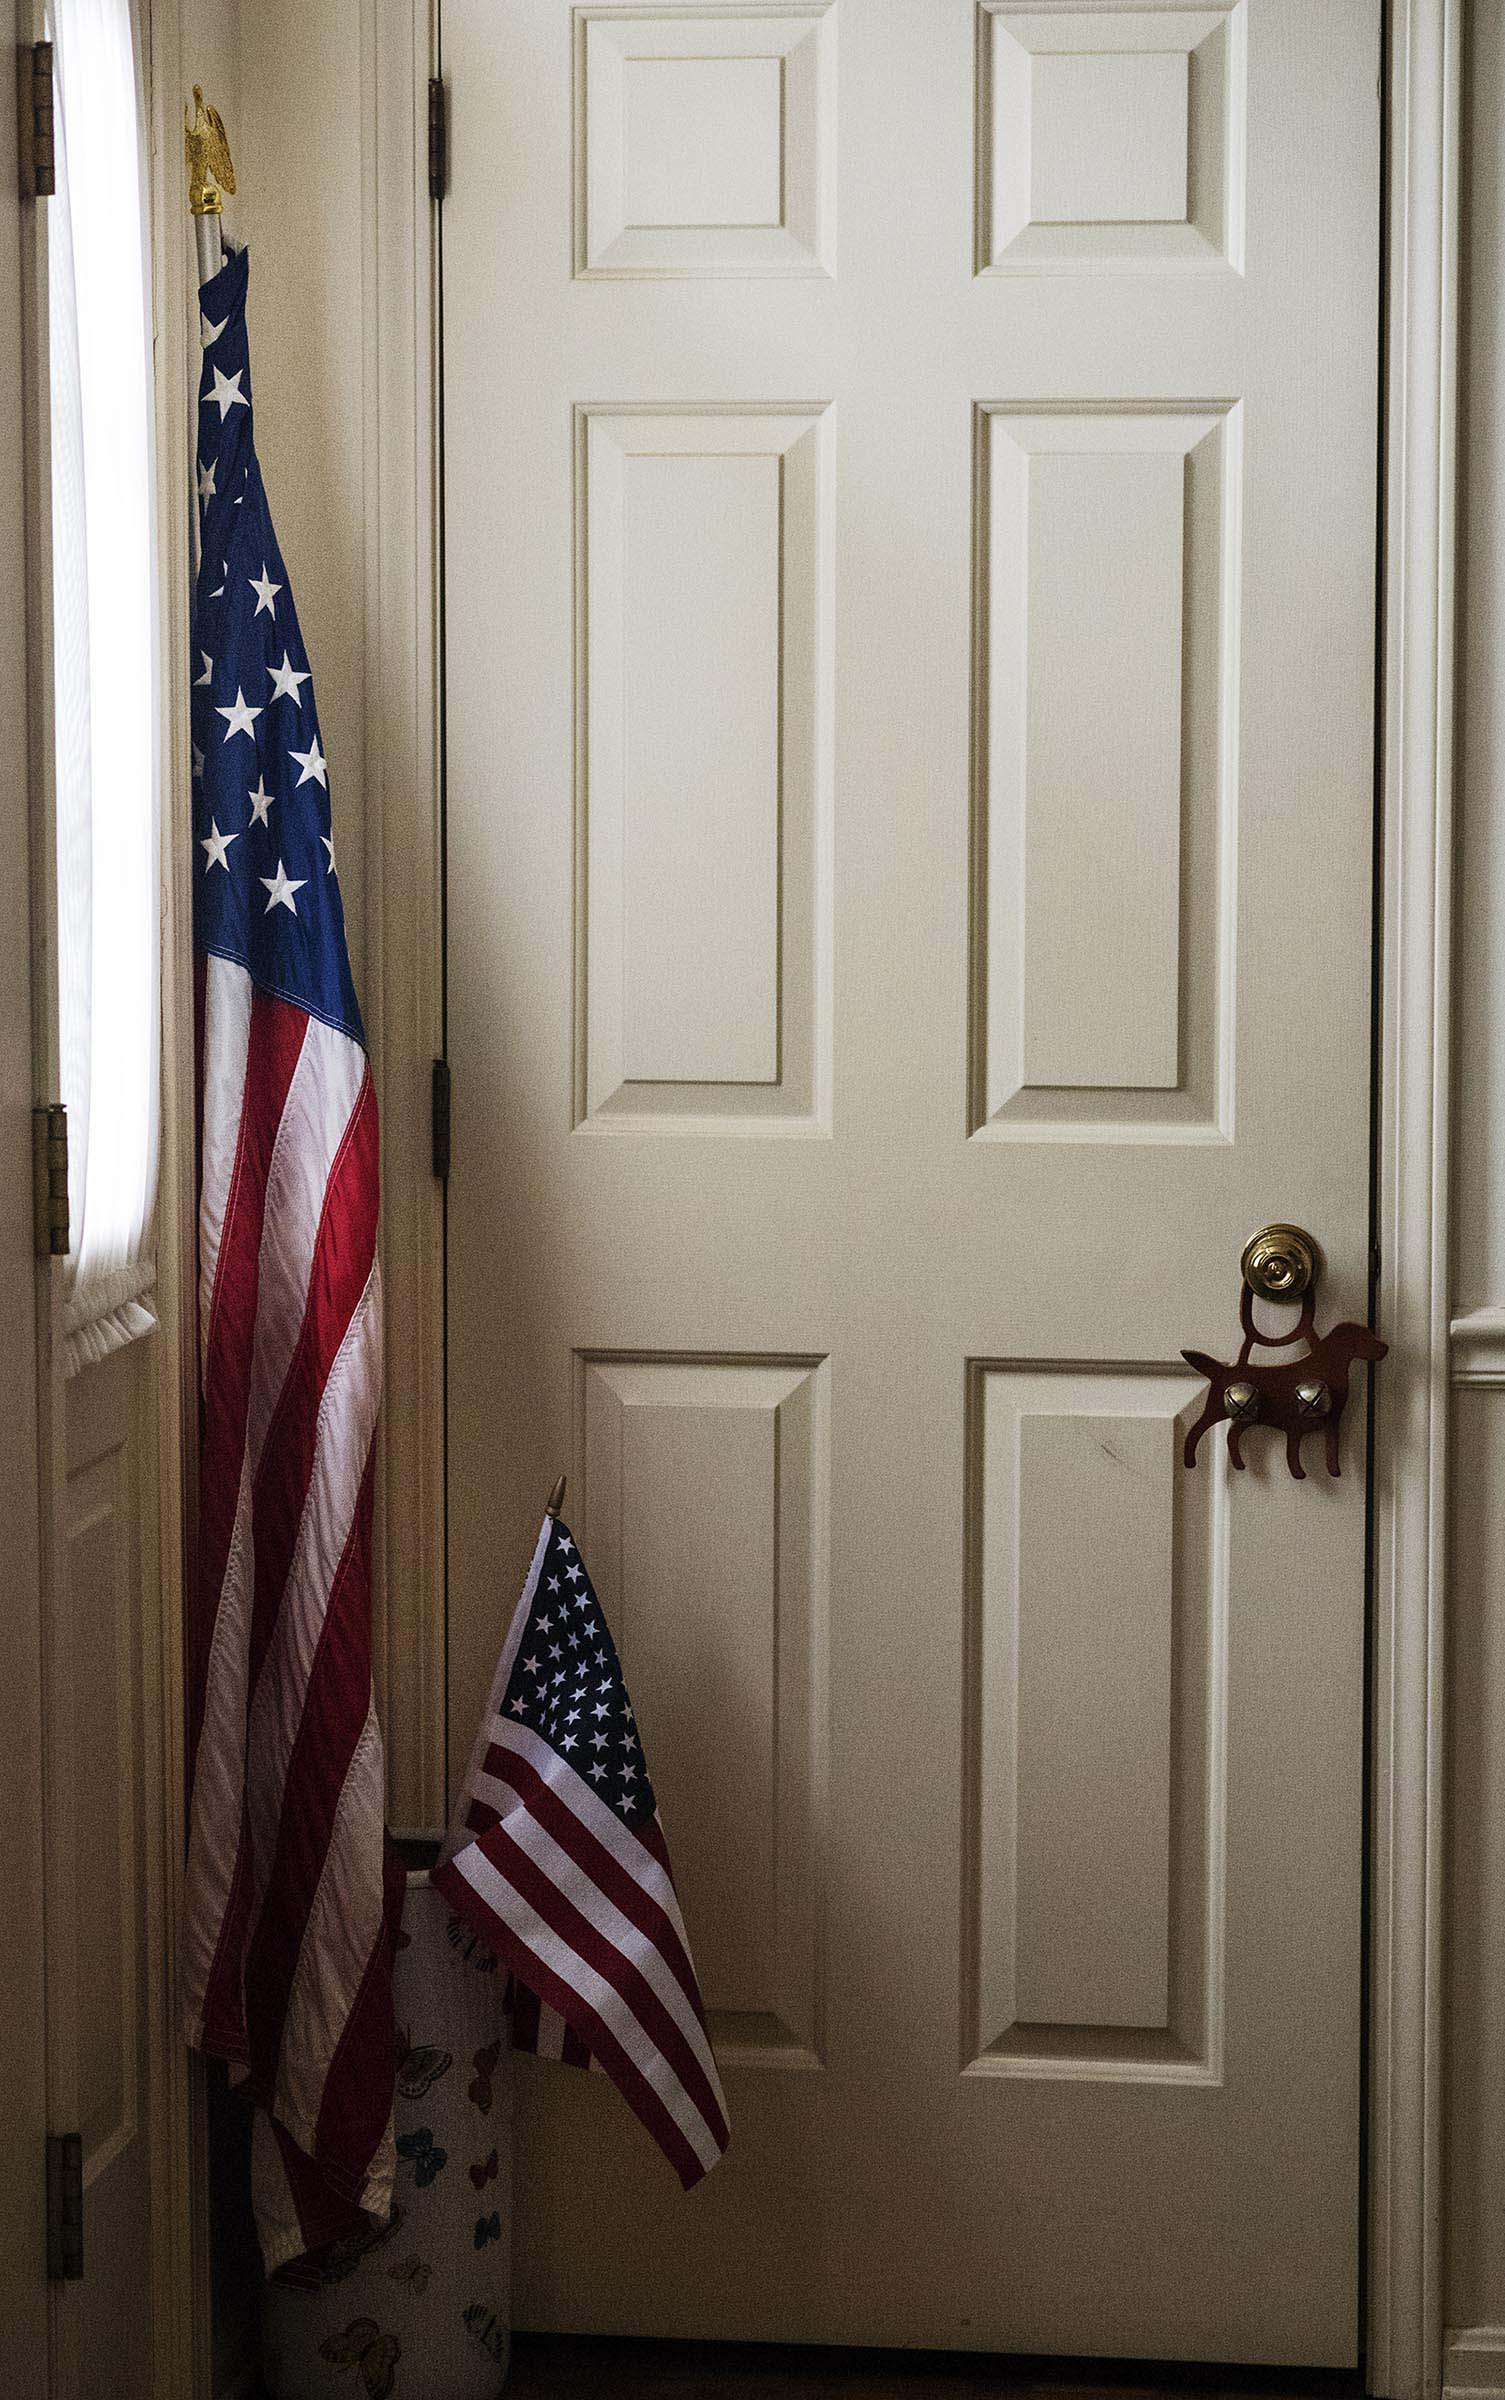  American flags sit next to the front door of Adam Nilson's mom's house.